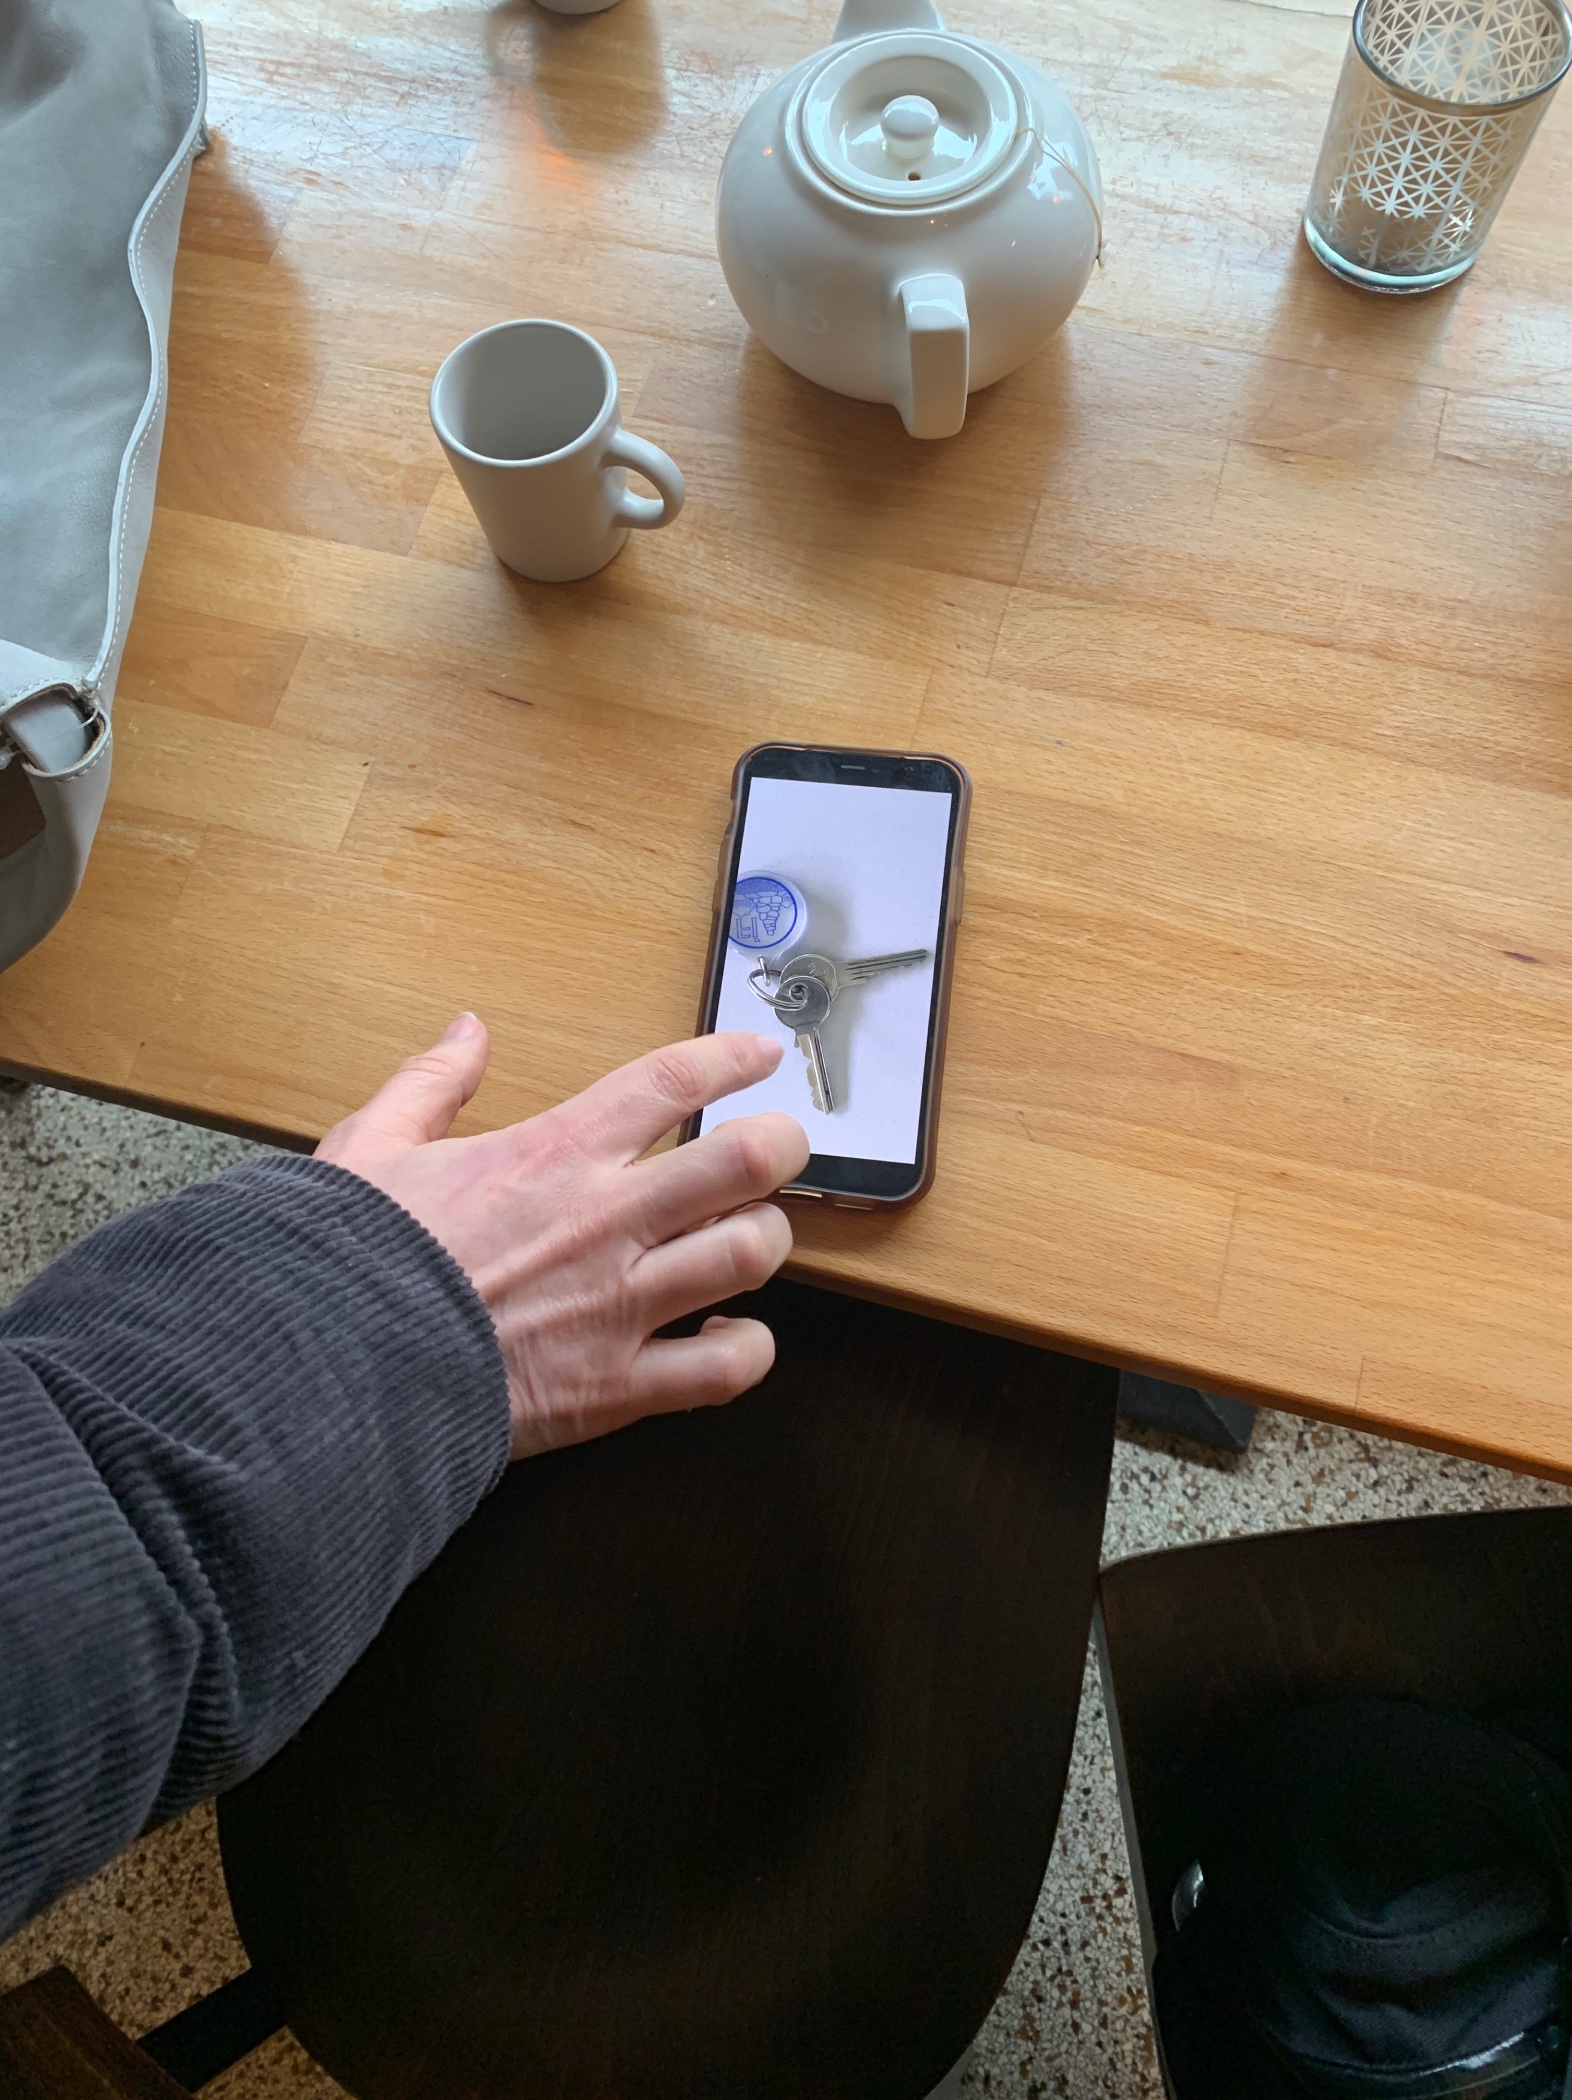 a hand reaching out to a iPhone with a photo of a key displayed on it